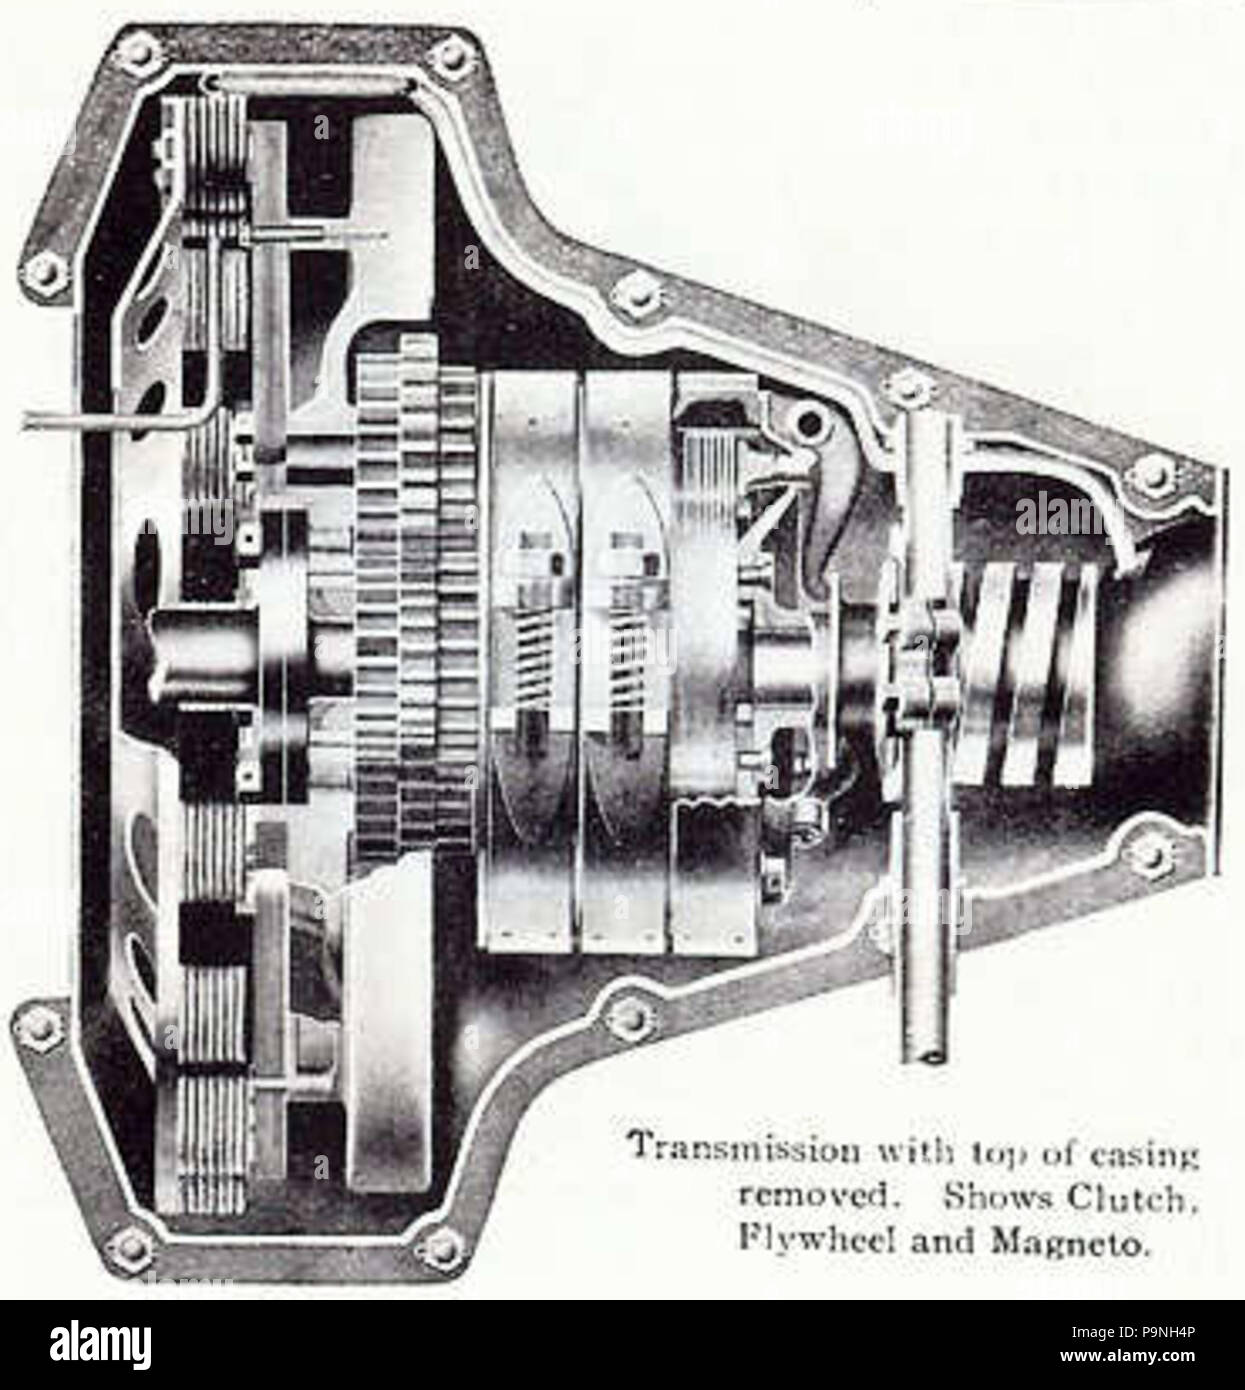 model t transmission exploded view